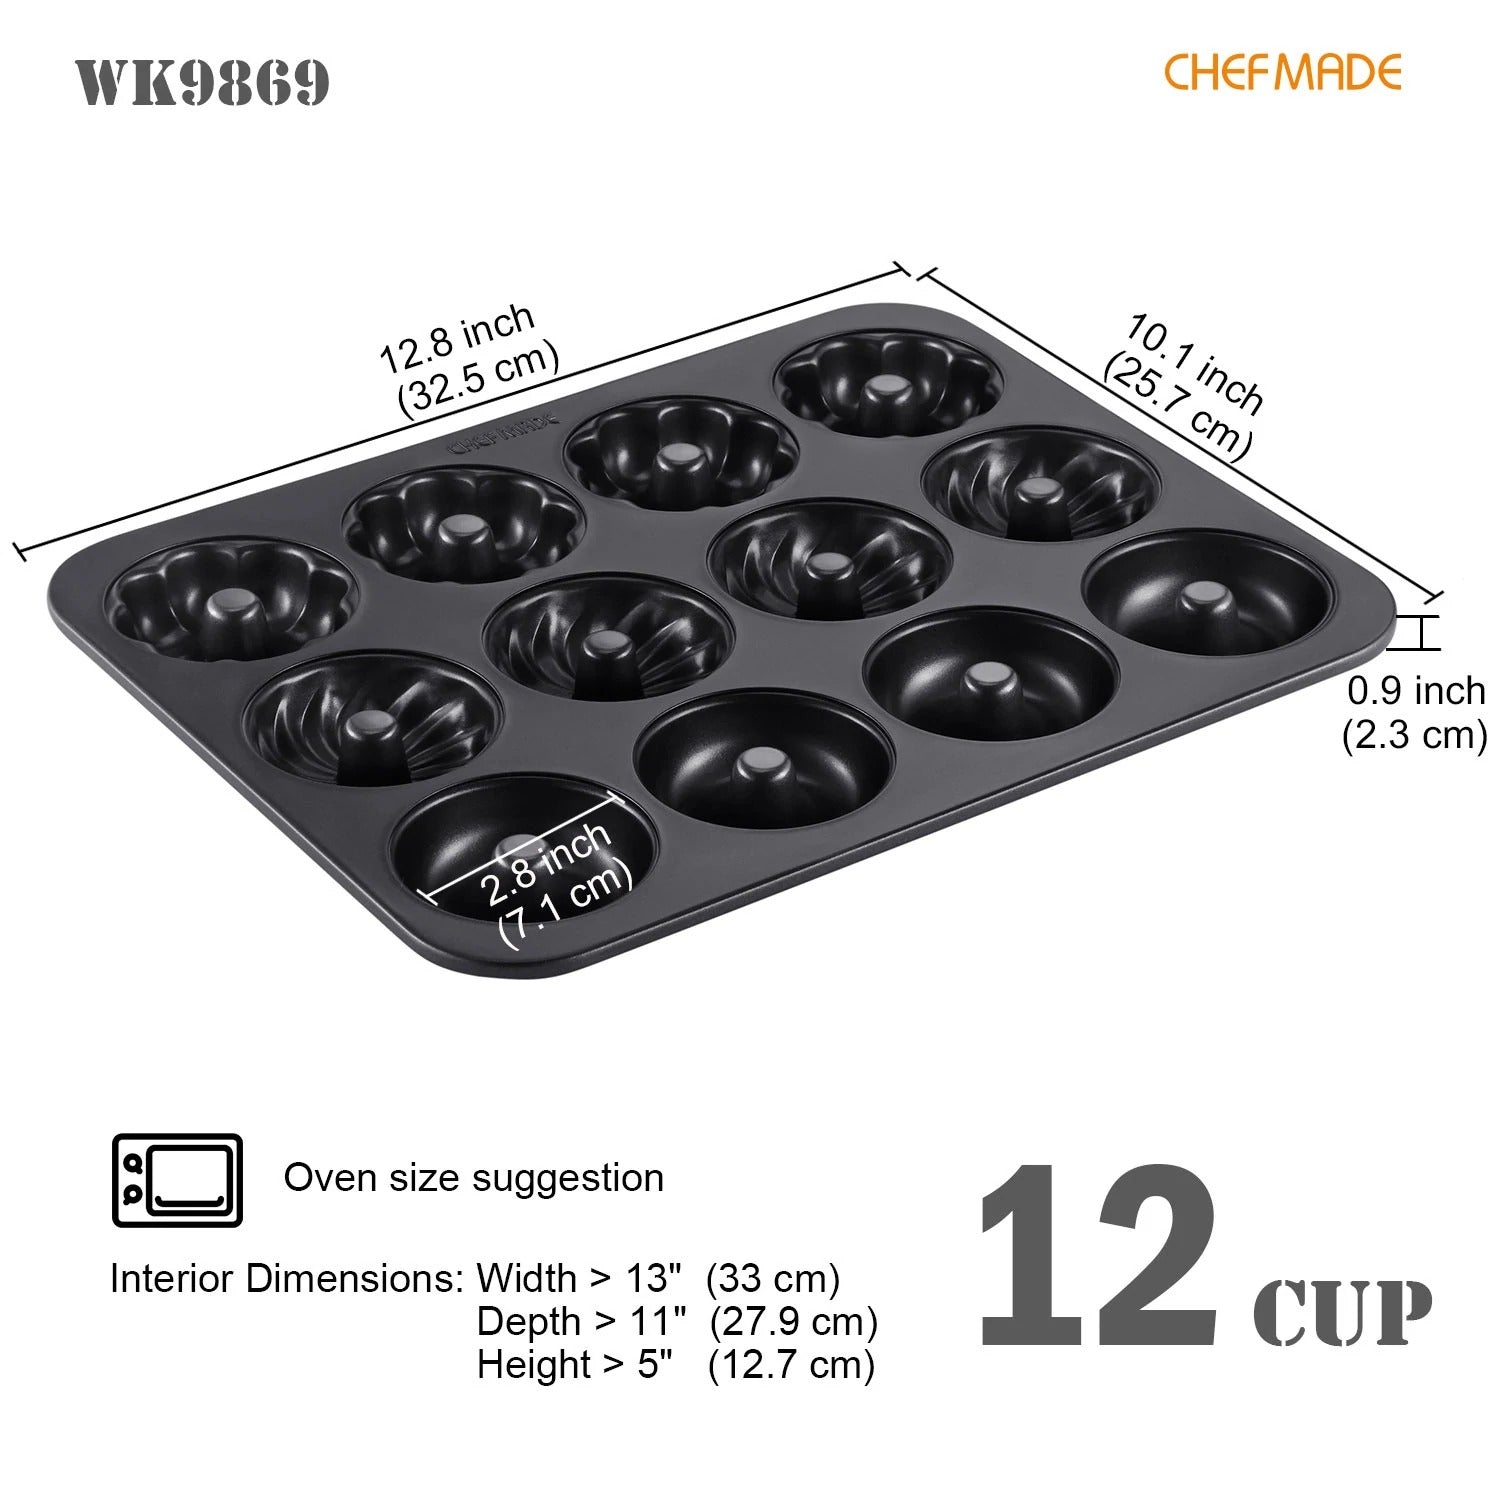 CHEFMADE 12 Cup Non-Stick Donut Pan (WK9869)